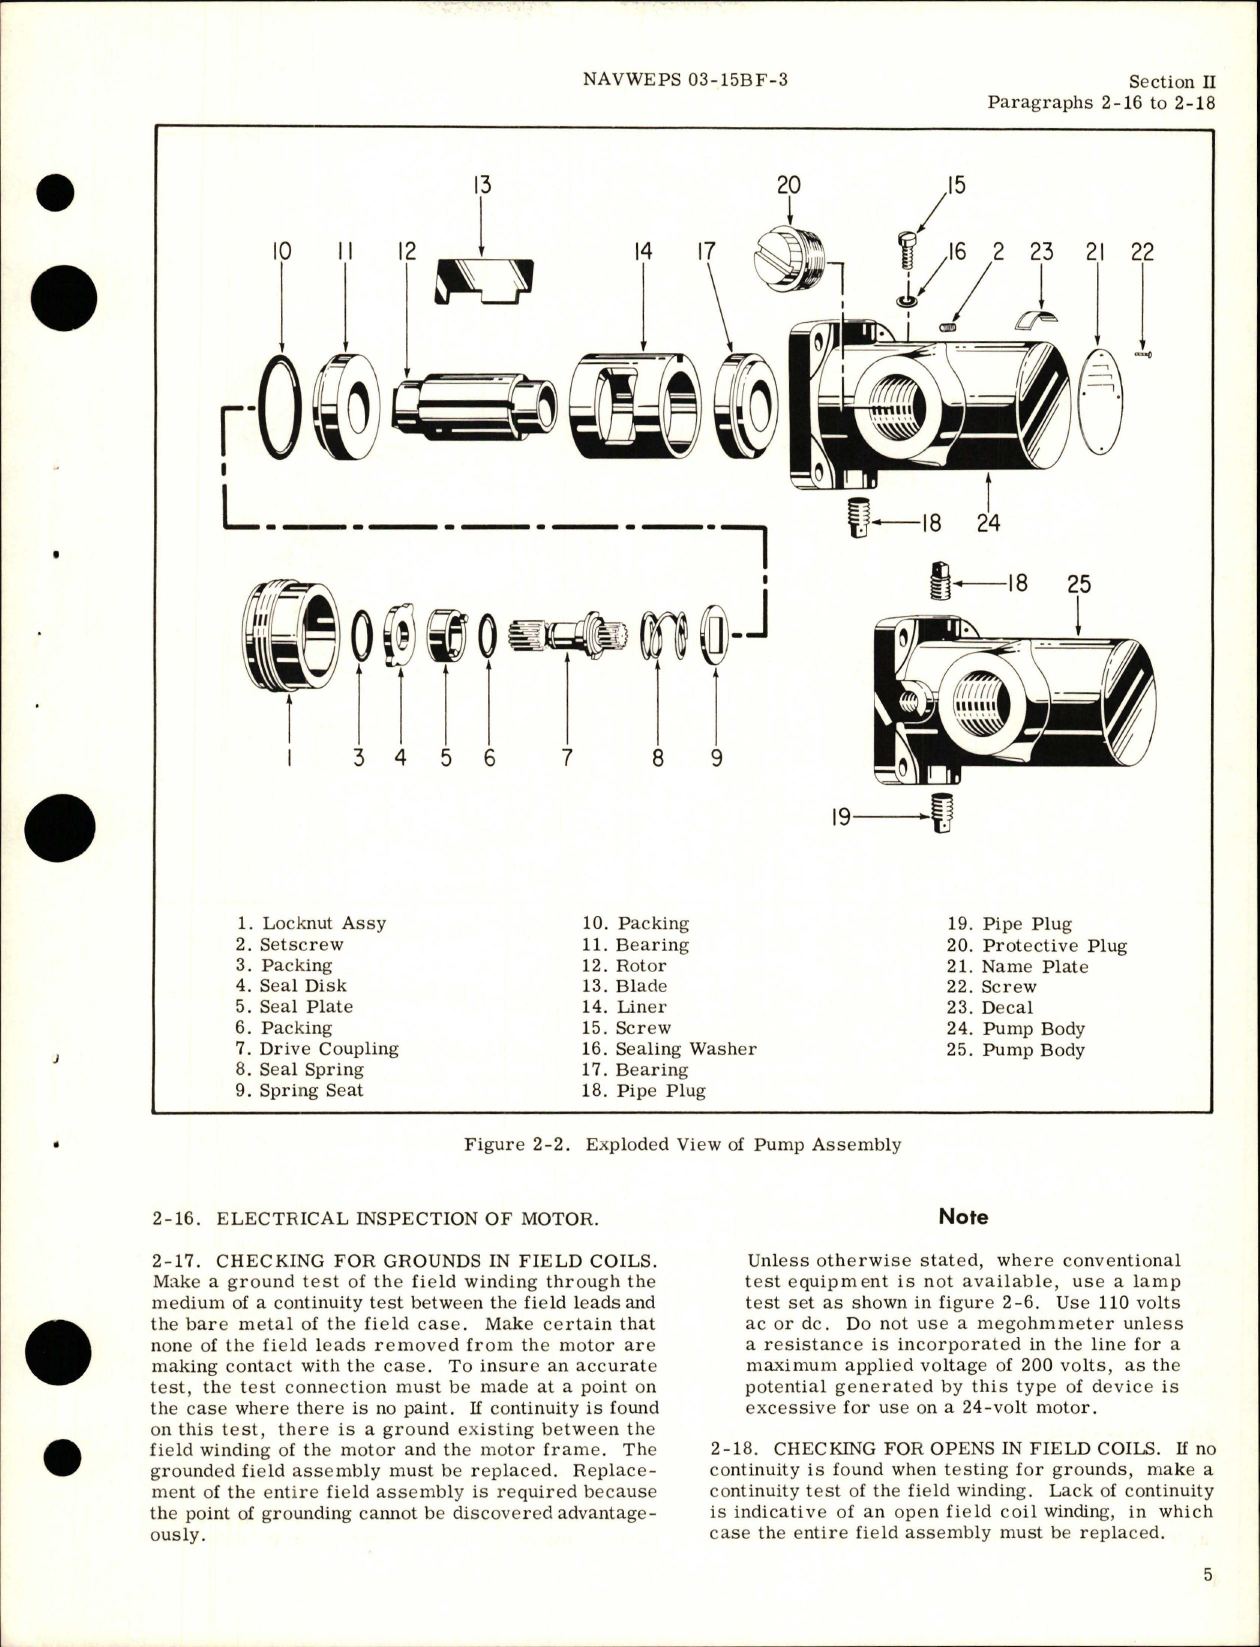 Sample page 9 from AirCorps Library document: Overhaul Instructions for Electric Motor Driven Hydraulic Oil Pump Assembly - Parts RG6100E1 and RG6100H